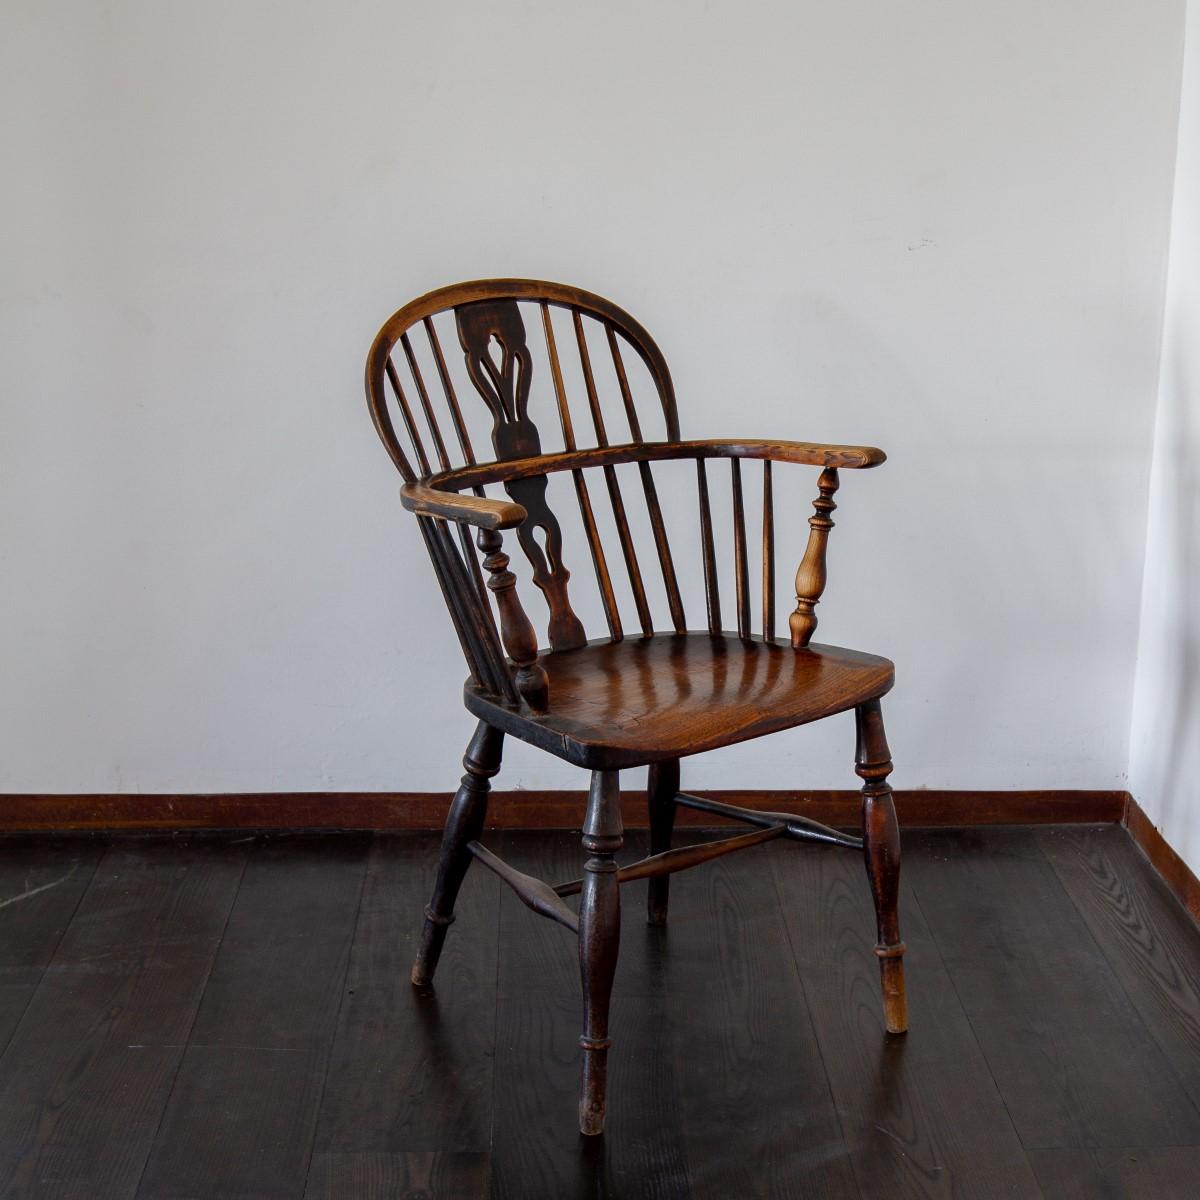 An early 19th century ash and elm low back Windsor armchair with a fruitwood splat above a solid saddle shaped seat, on turned legs connected by an 'H' stretcher.